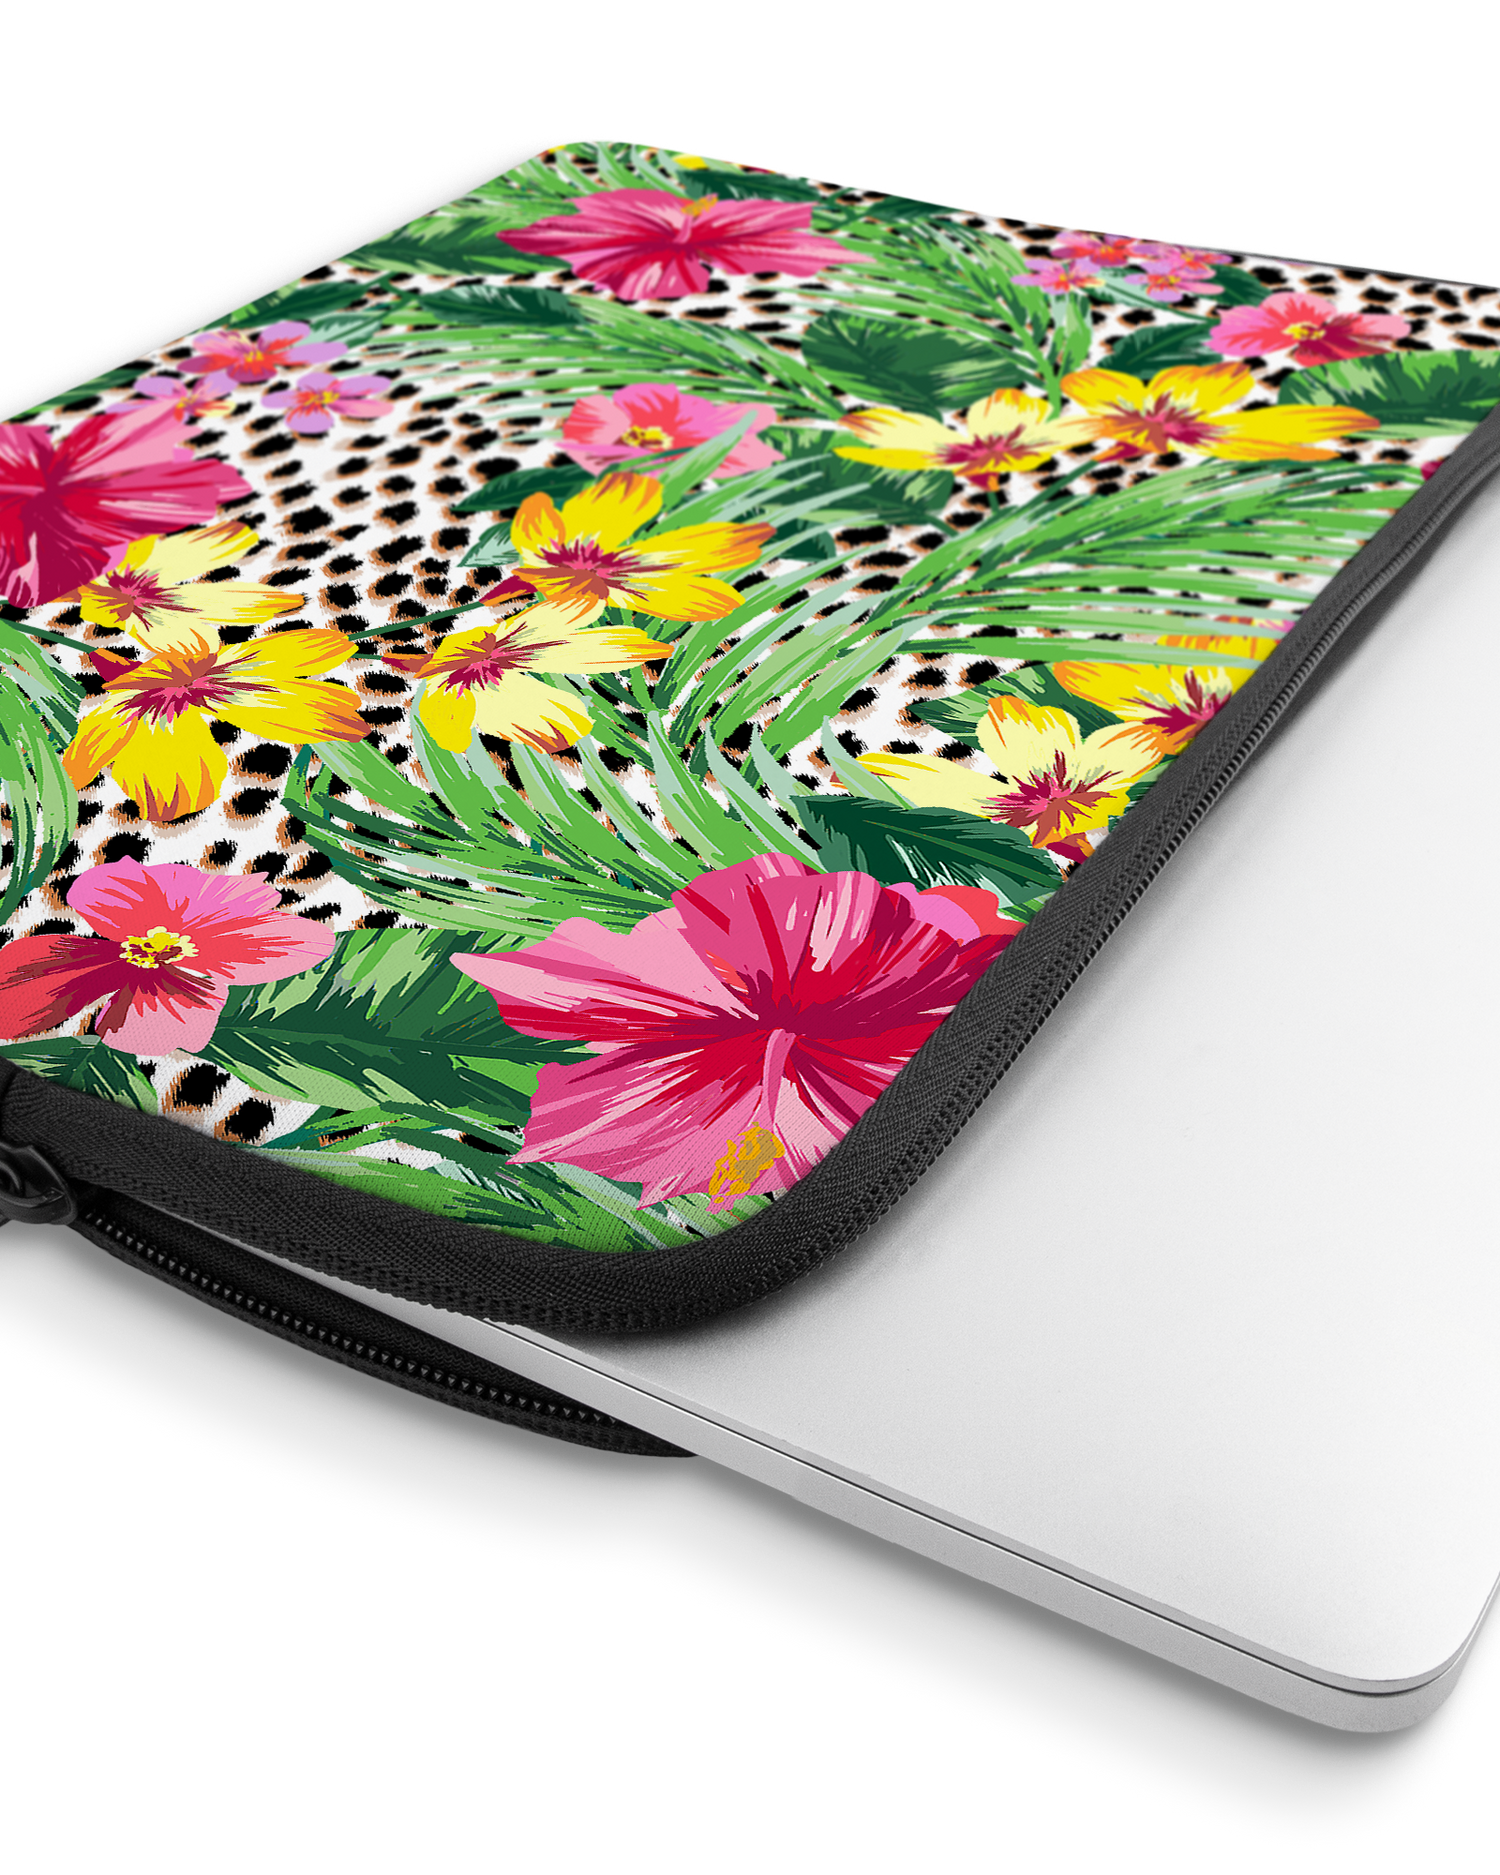 Tropical Cheetah Laptop Case 13 inch with device inside